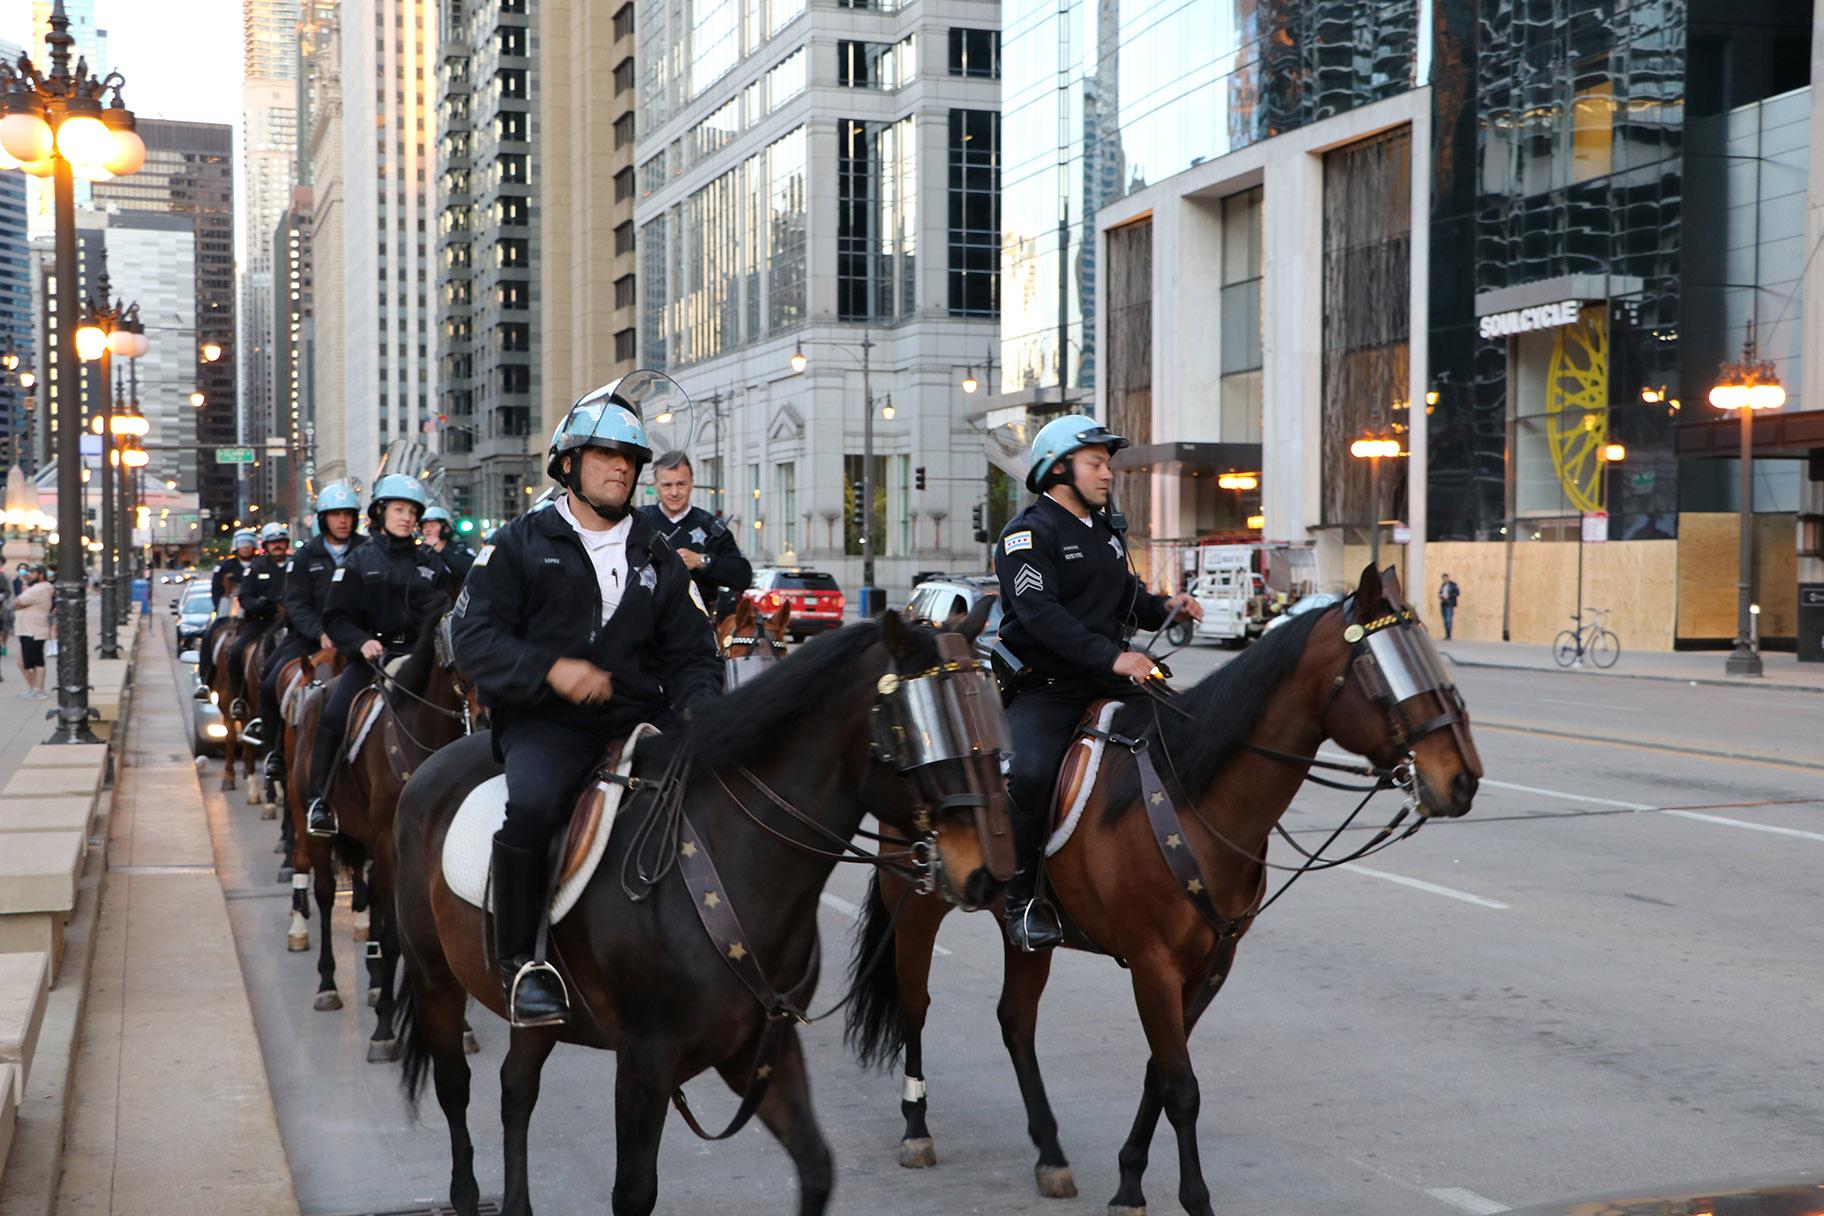 Police officers on horseback line up near the LaSalle Street bridge, the only visibly lowered bridge in the area. (Evan Garcia / WTTW News)